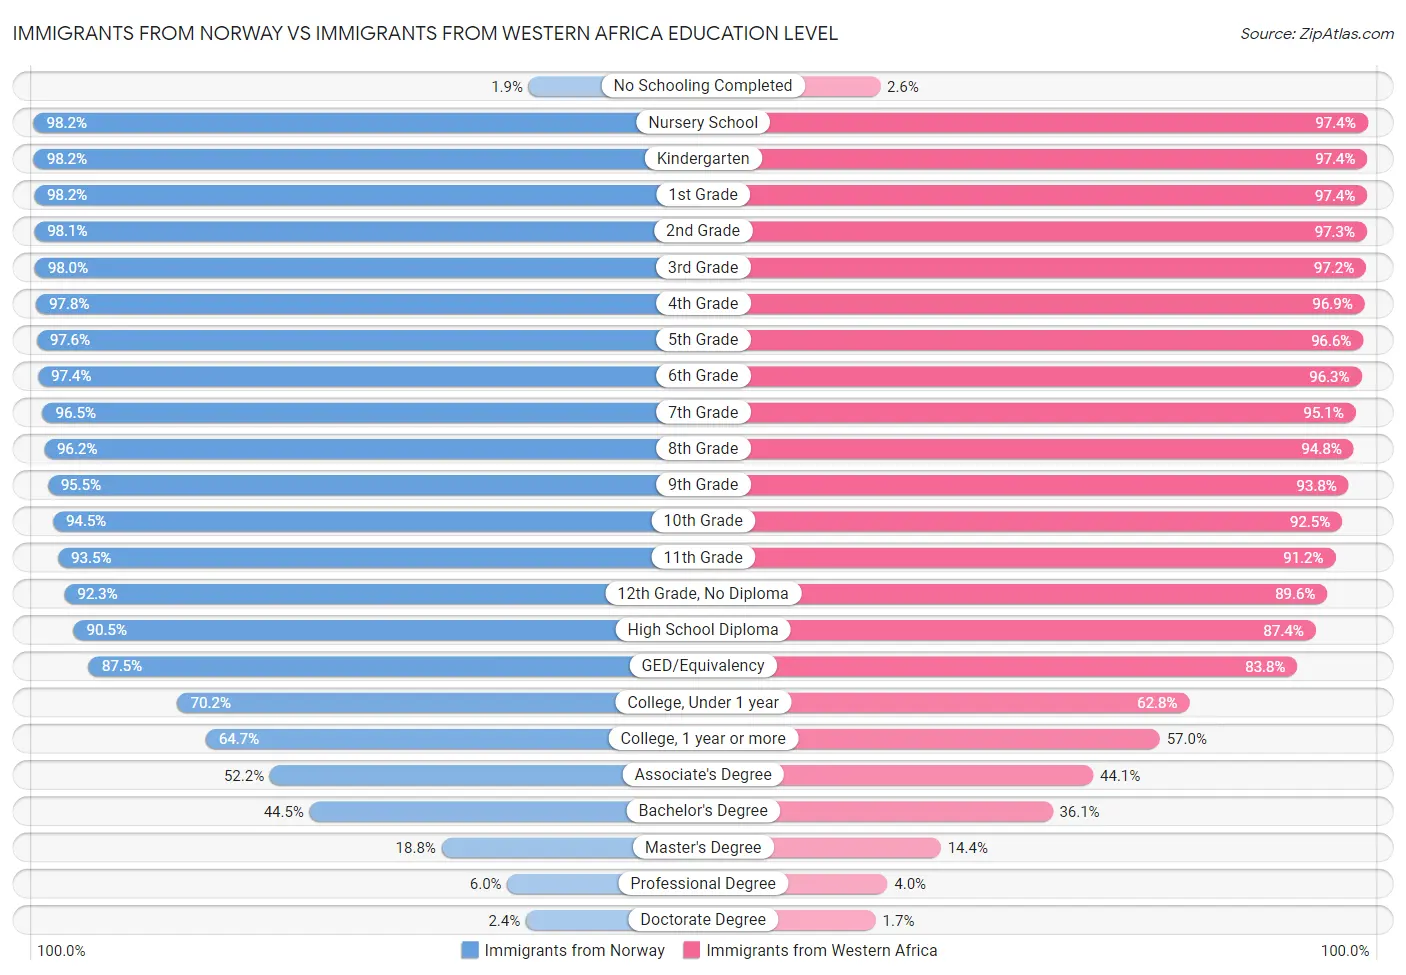 Immigrants from Norway vs Immigrants from Western Africa Education Level